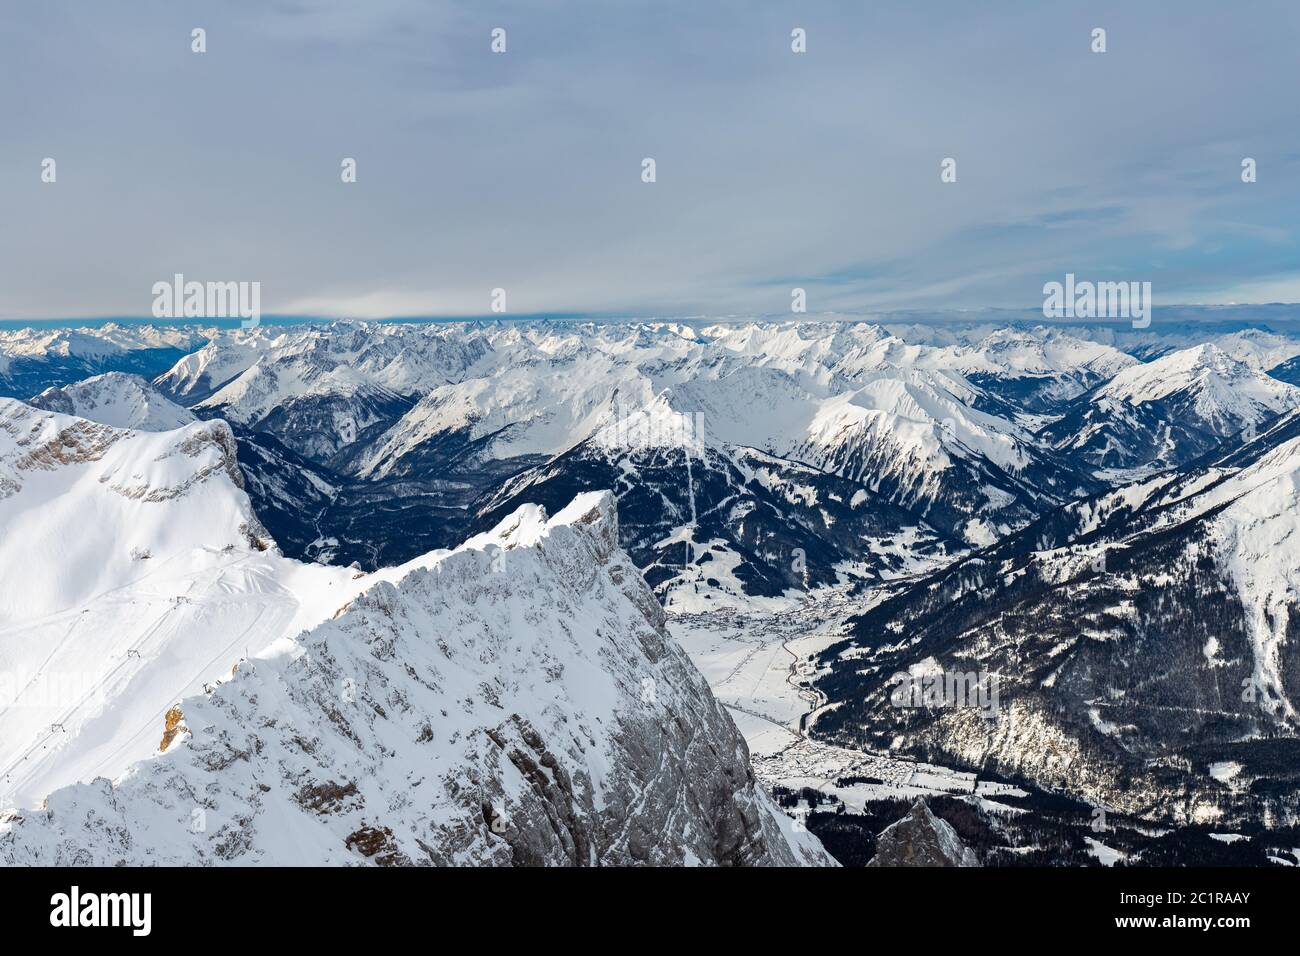 View from summit of Zugspitze mountain to Ehrwald, Tyrol Stock Photo